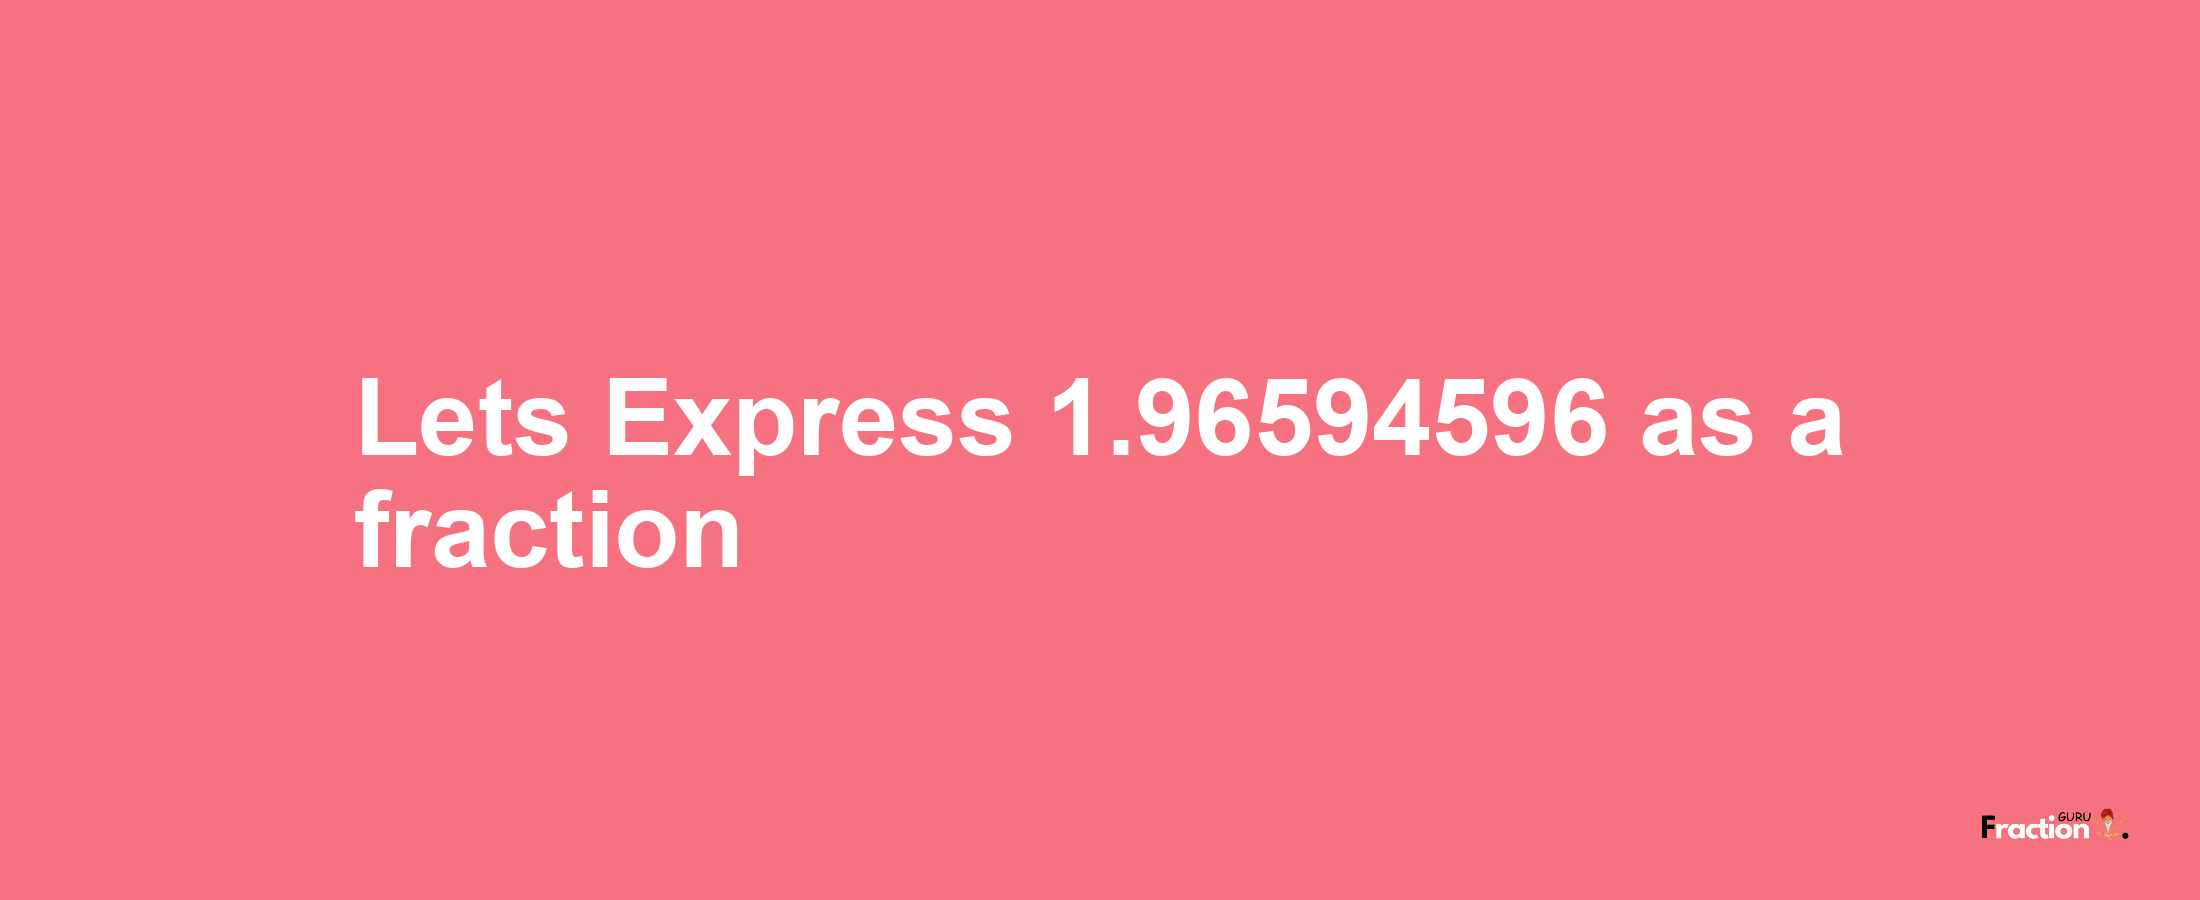 Lets Express 1.96594596 as afraction